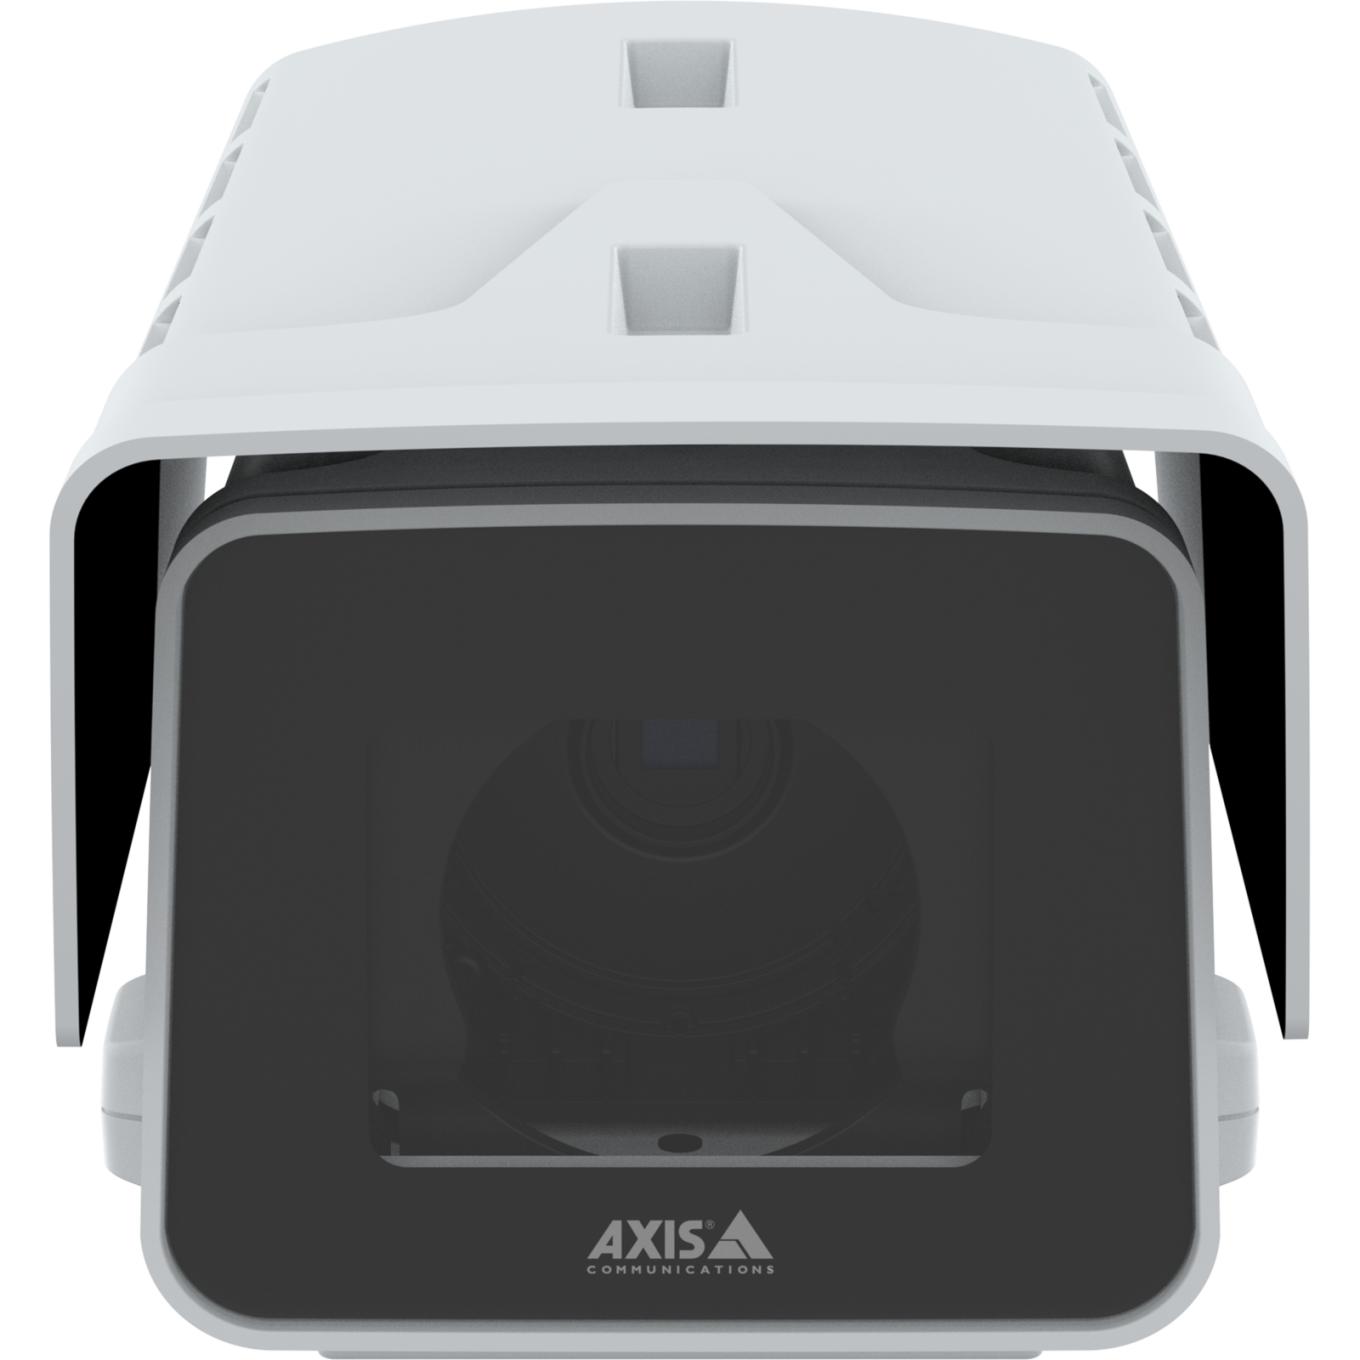 AXIS P1388-BE seen straight from the front